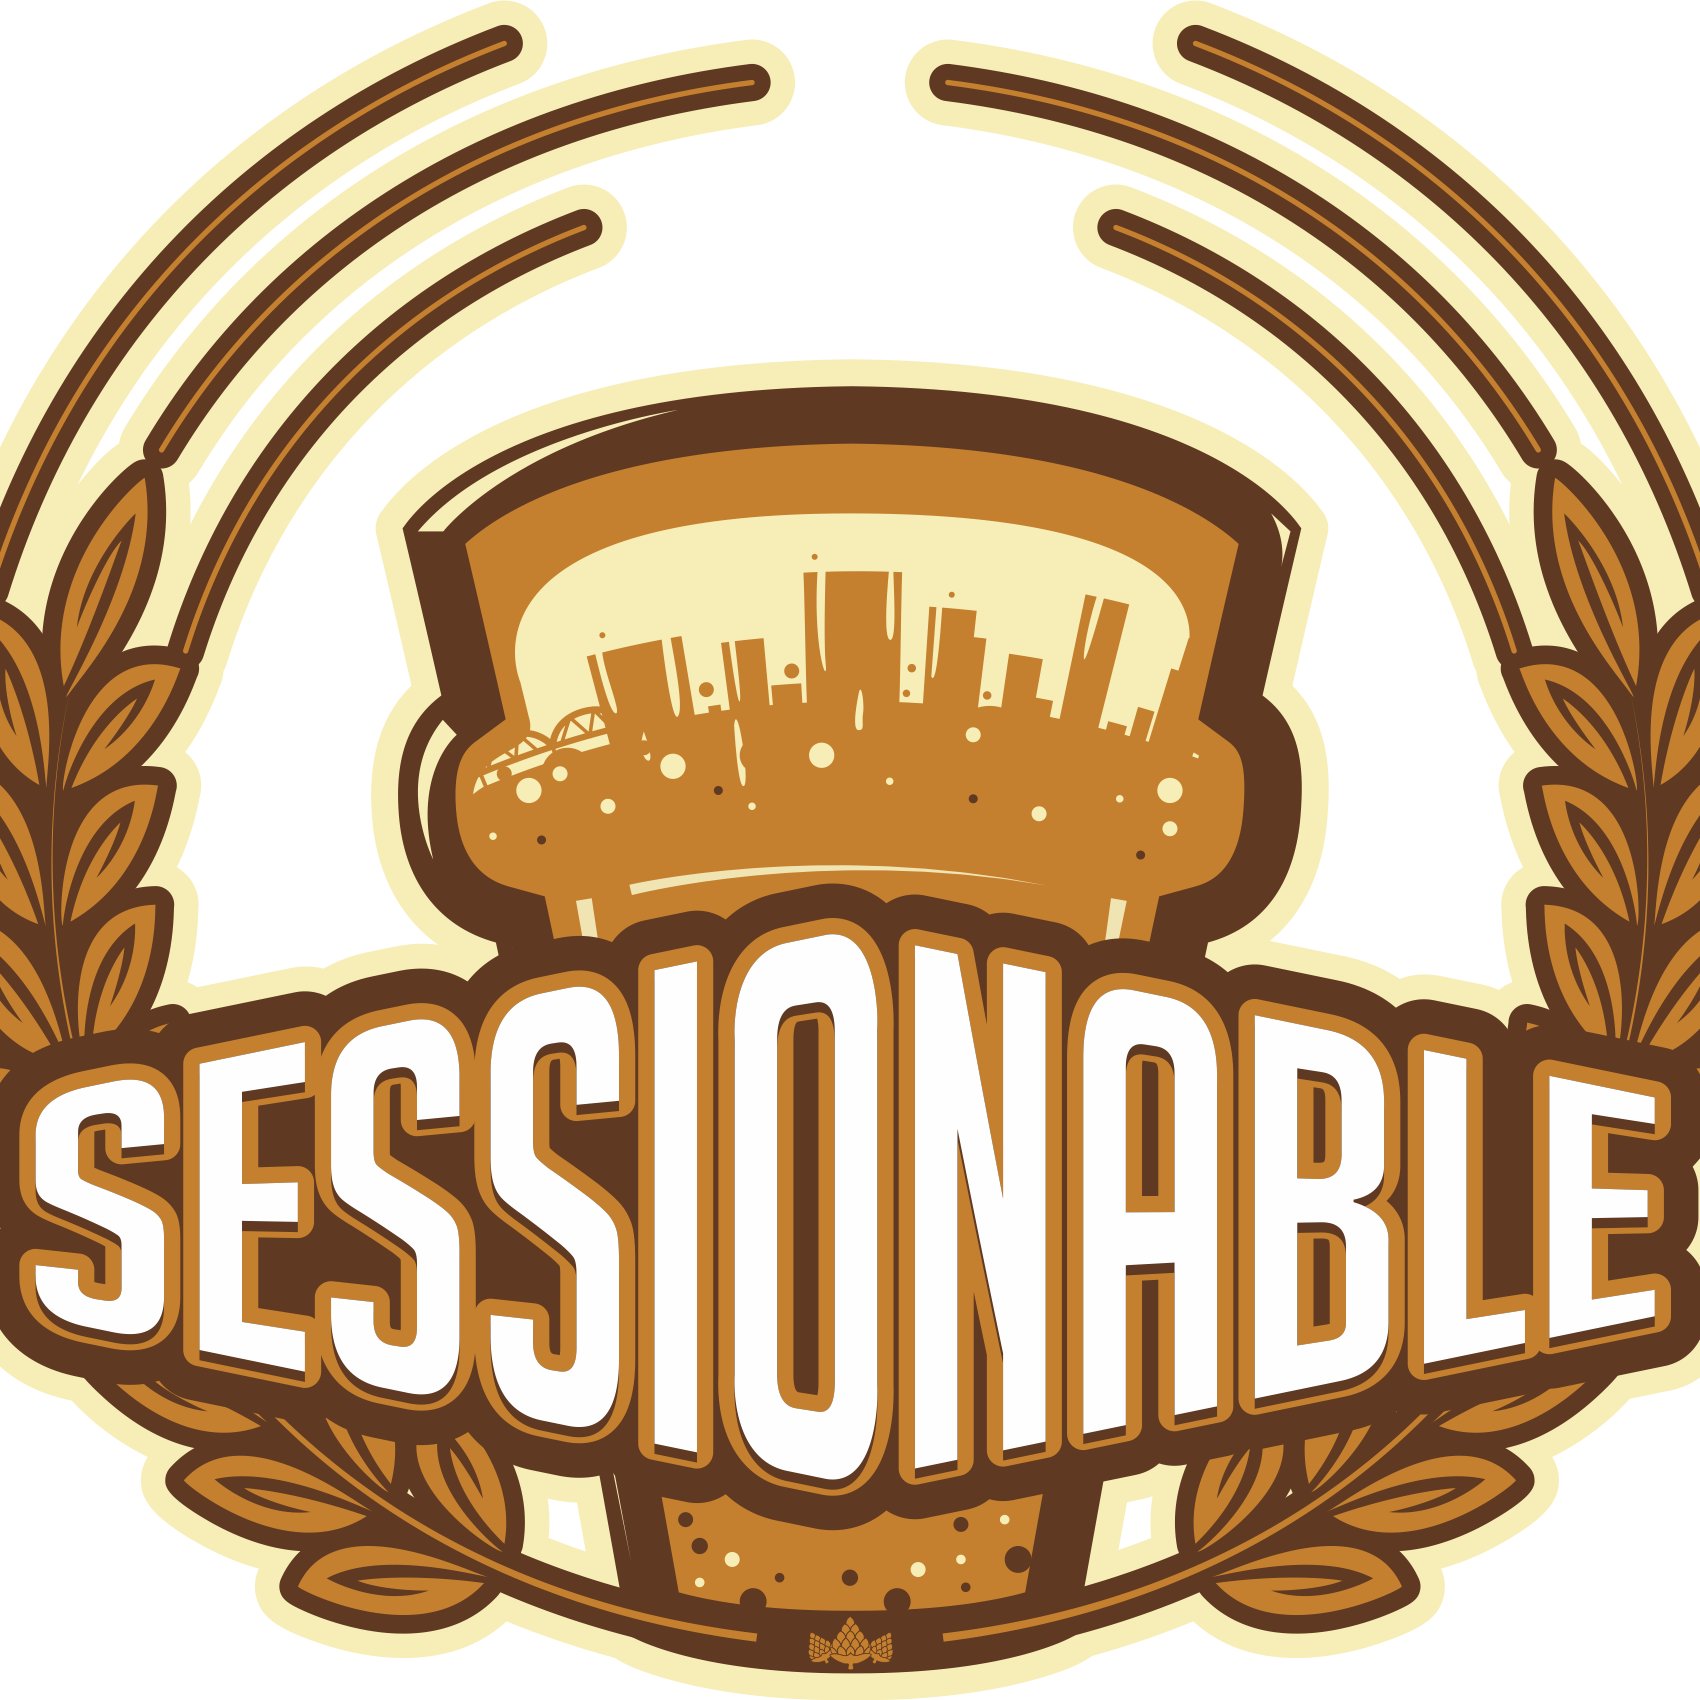 Sessionable is a taphouse focused on beer styles that are underrepresented in the NW market. We're located in Portland Oregon at 3588 SE Division.